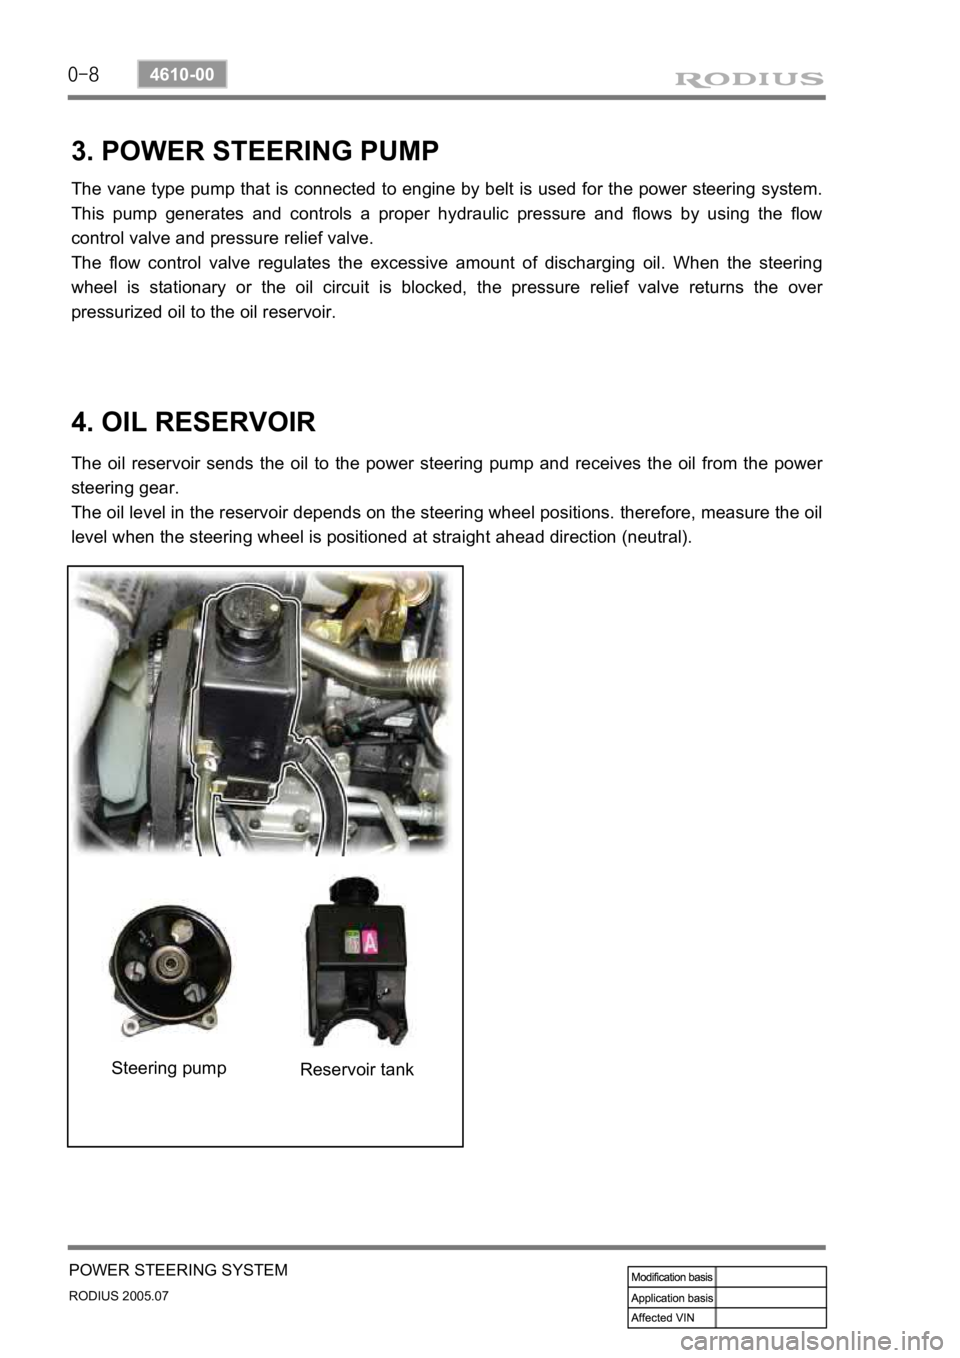 SSANGYONG RODIUS 2005  Service Manual 0-8
RODIUS 2005.07
4610-00
POWER STEERING SYSTEM
3. POWER STEERING PUMP
The vane type pump that is connected to engine by belt is used for the power steering system.  
This pump generates and controls